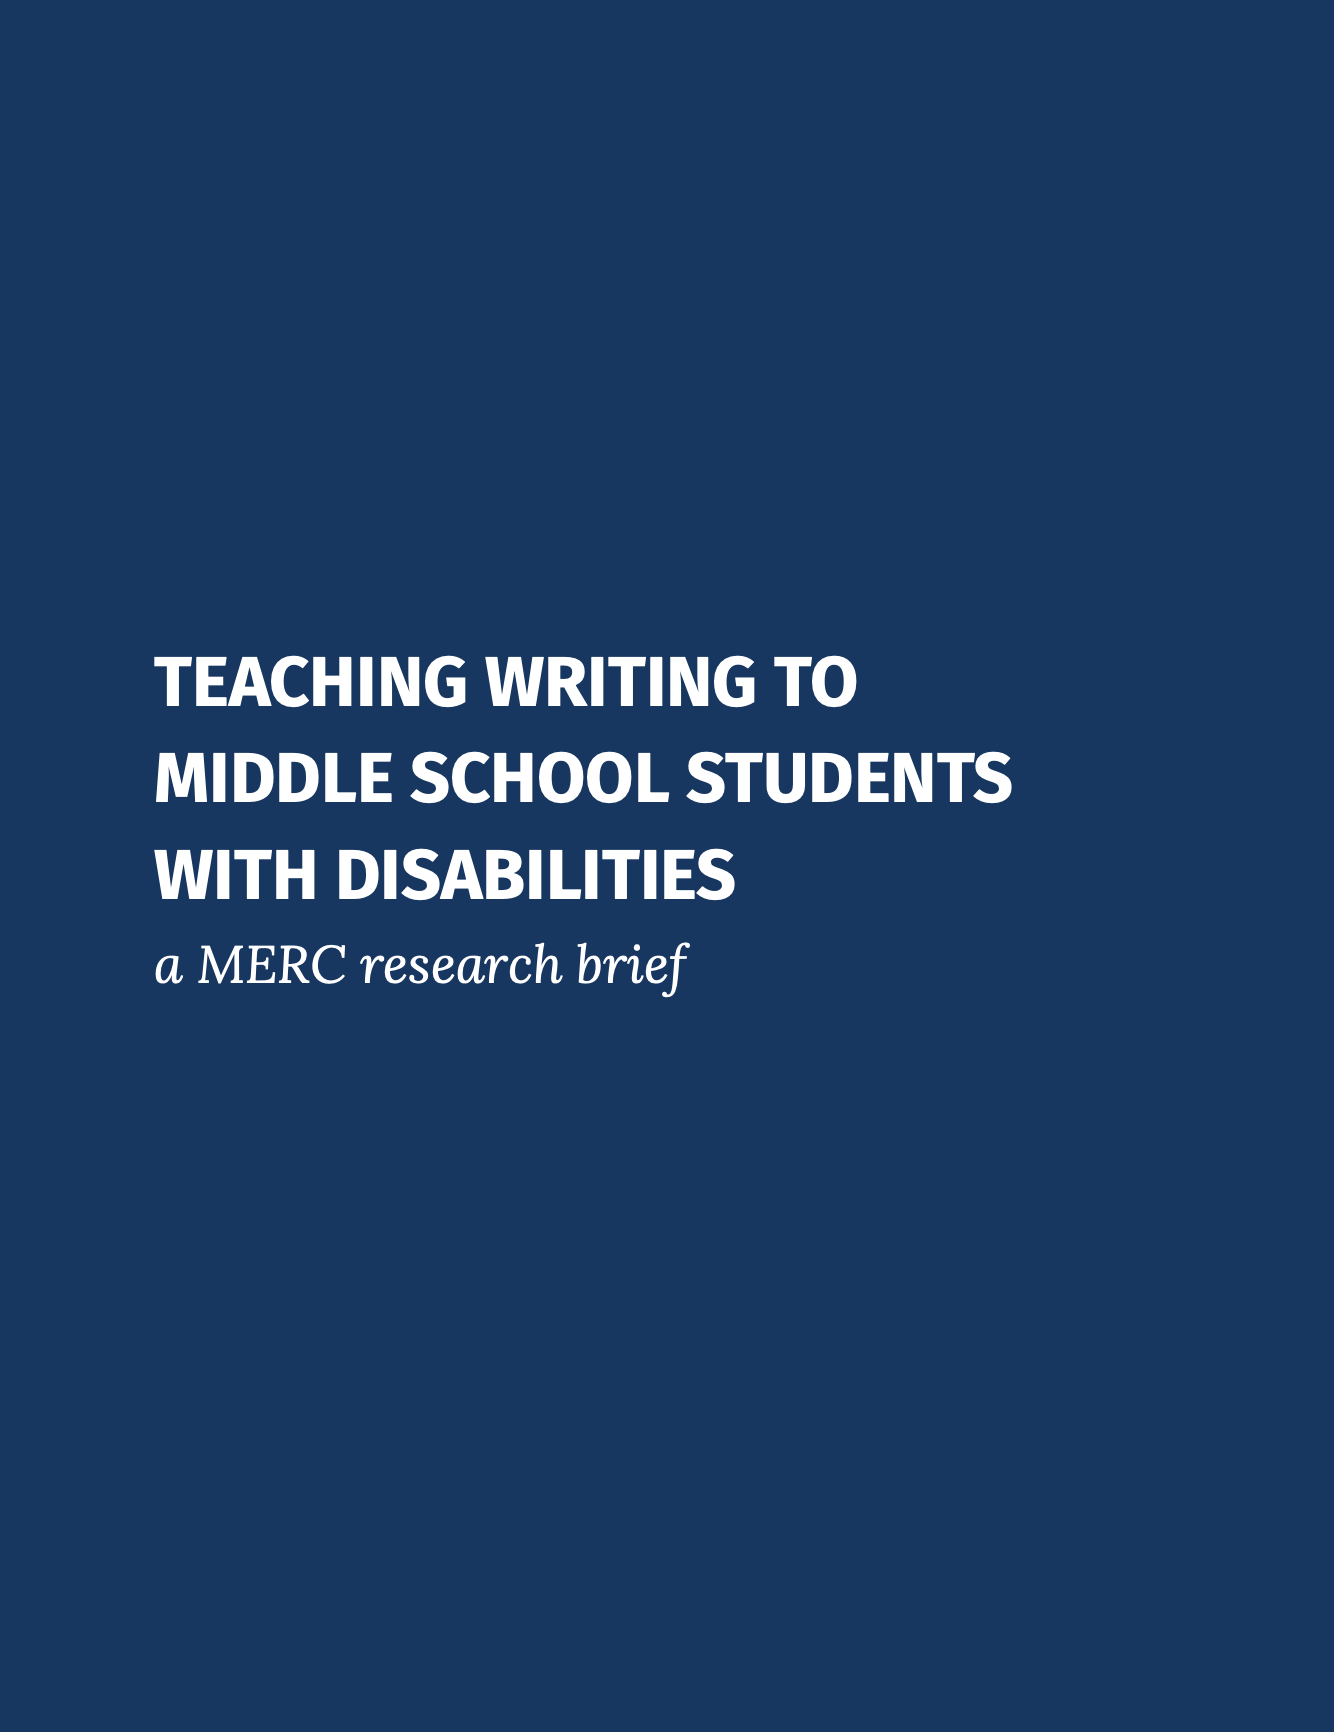 The cover of the MERC research brief titled Teaching Writing to Middle School Students with Disabilities